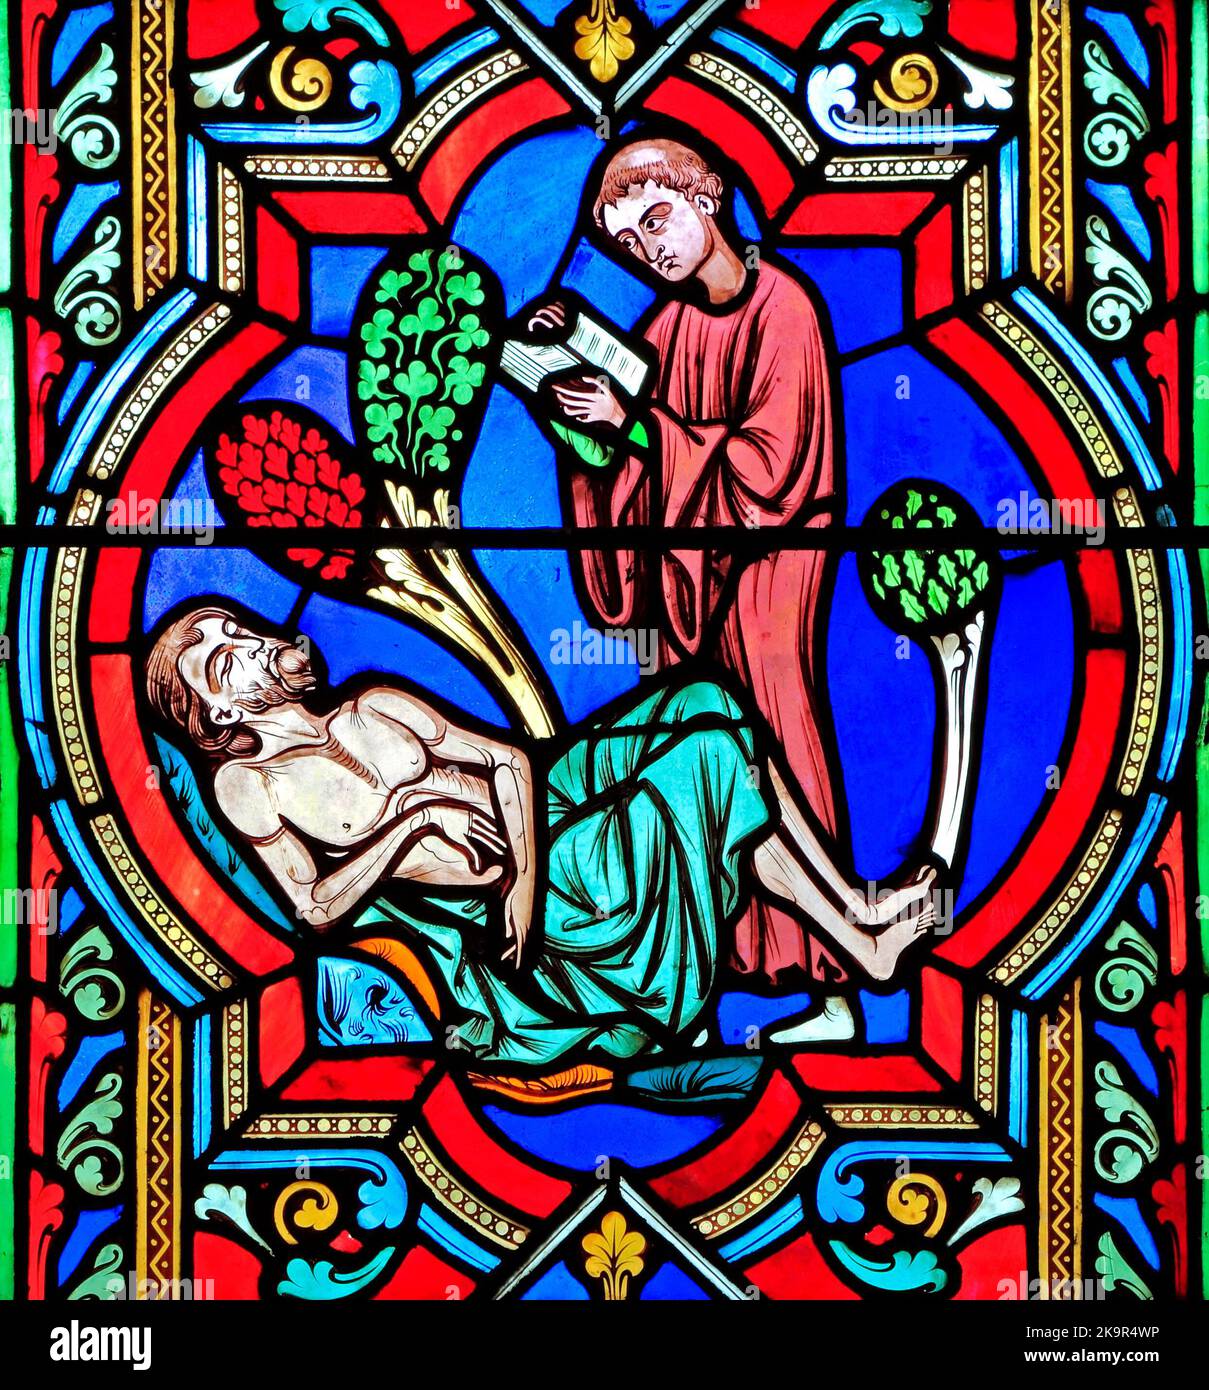 The Good Samaritan Parable, a Levite 'passes by on the other side', ignoring dying traveller, stained glass window by Oudinot of Paris, 1859, Feltwell Stock Photo